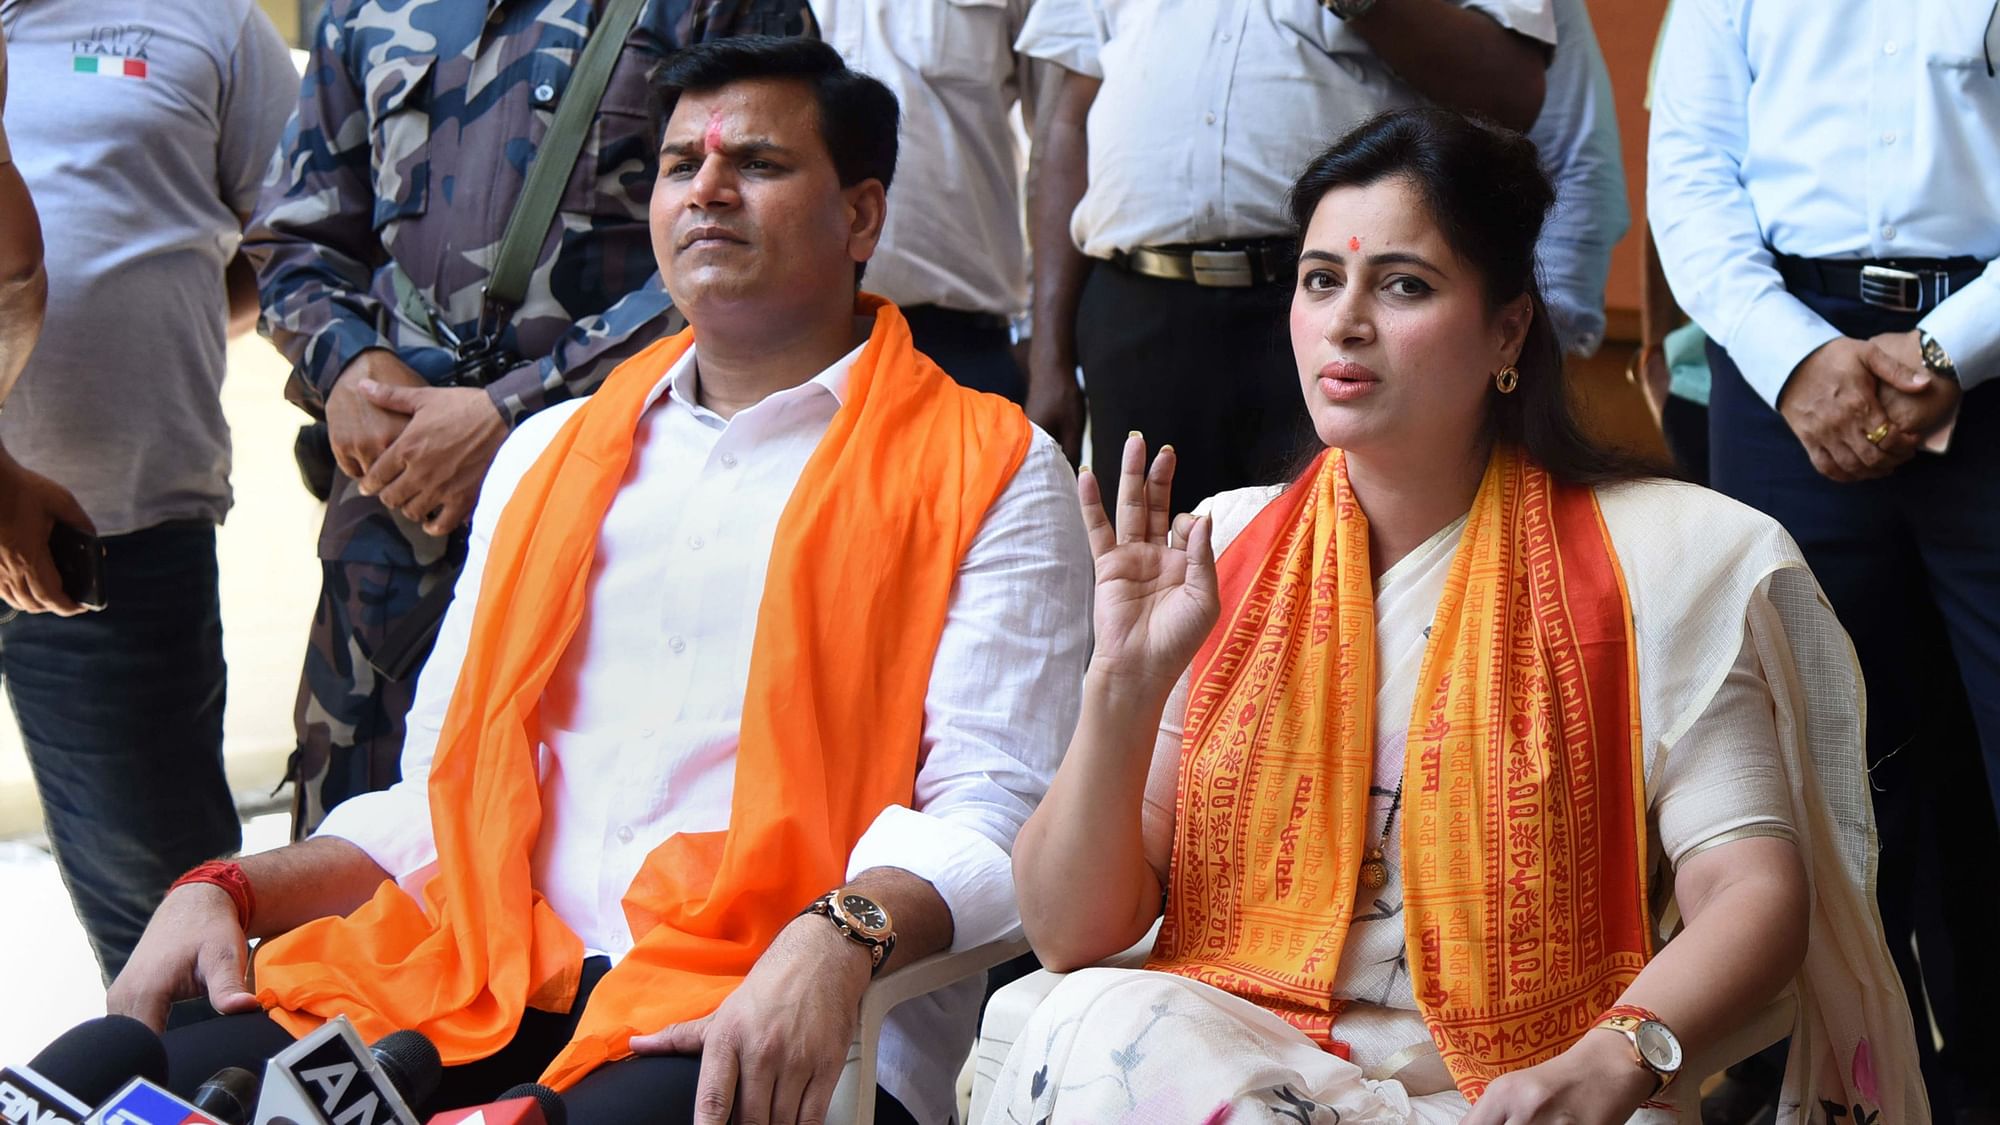 <div class="paragraphs"><p>From a mass wedding ceremony under the tutelage of Baba Ramdev to a controversy over a forged caste certificate, Amravati MP Navneet Rana and her husband Ravi Rana have never been far from the public eye.</p></div>